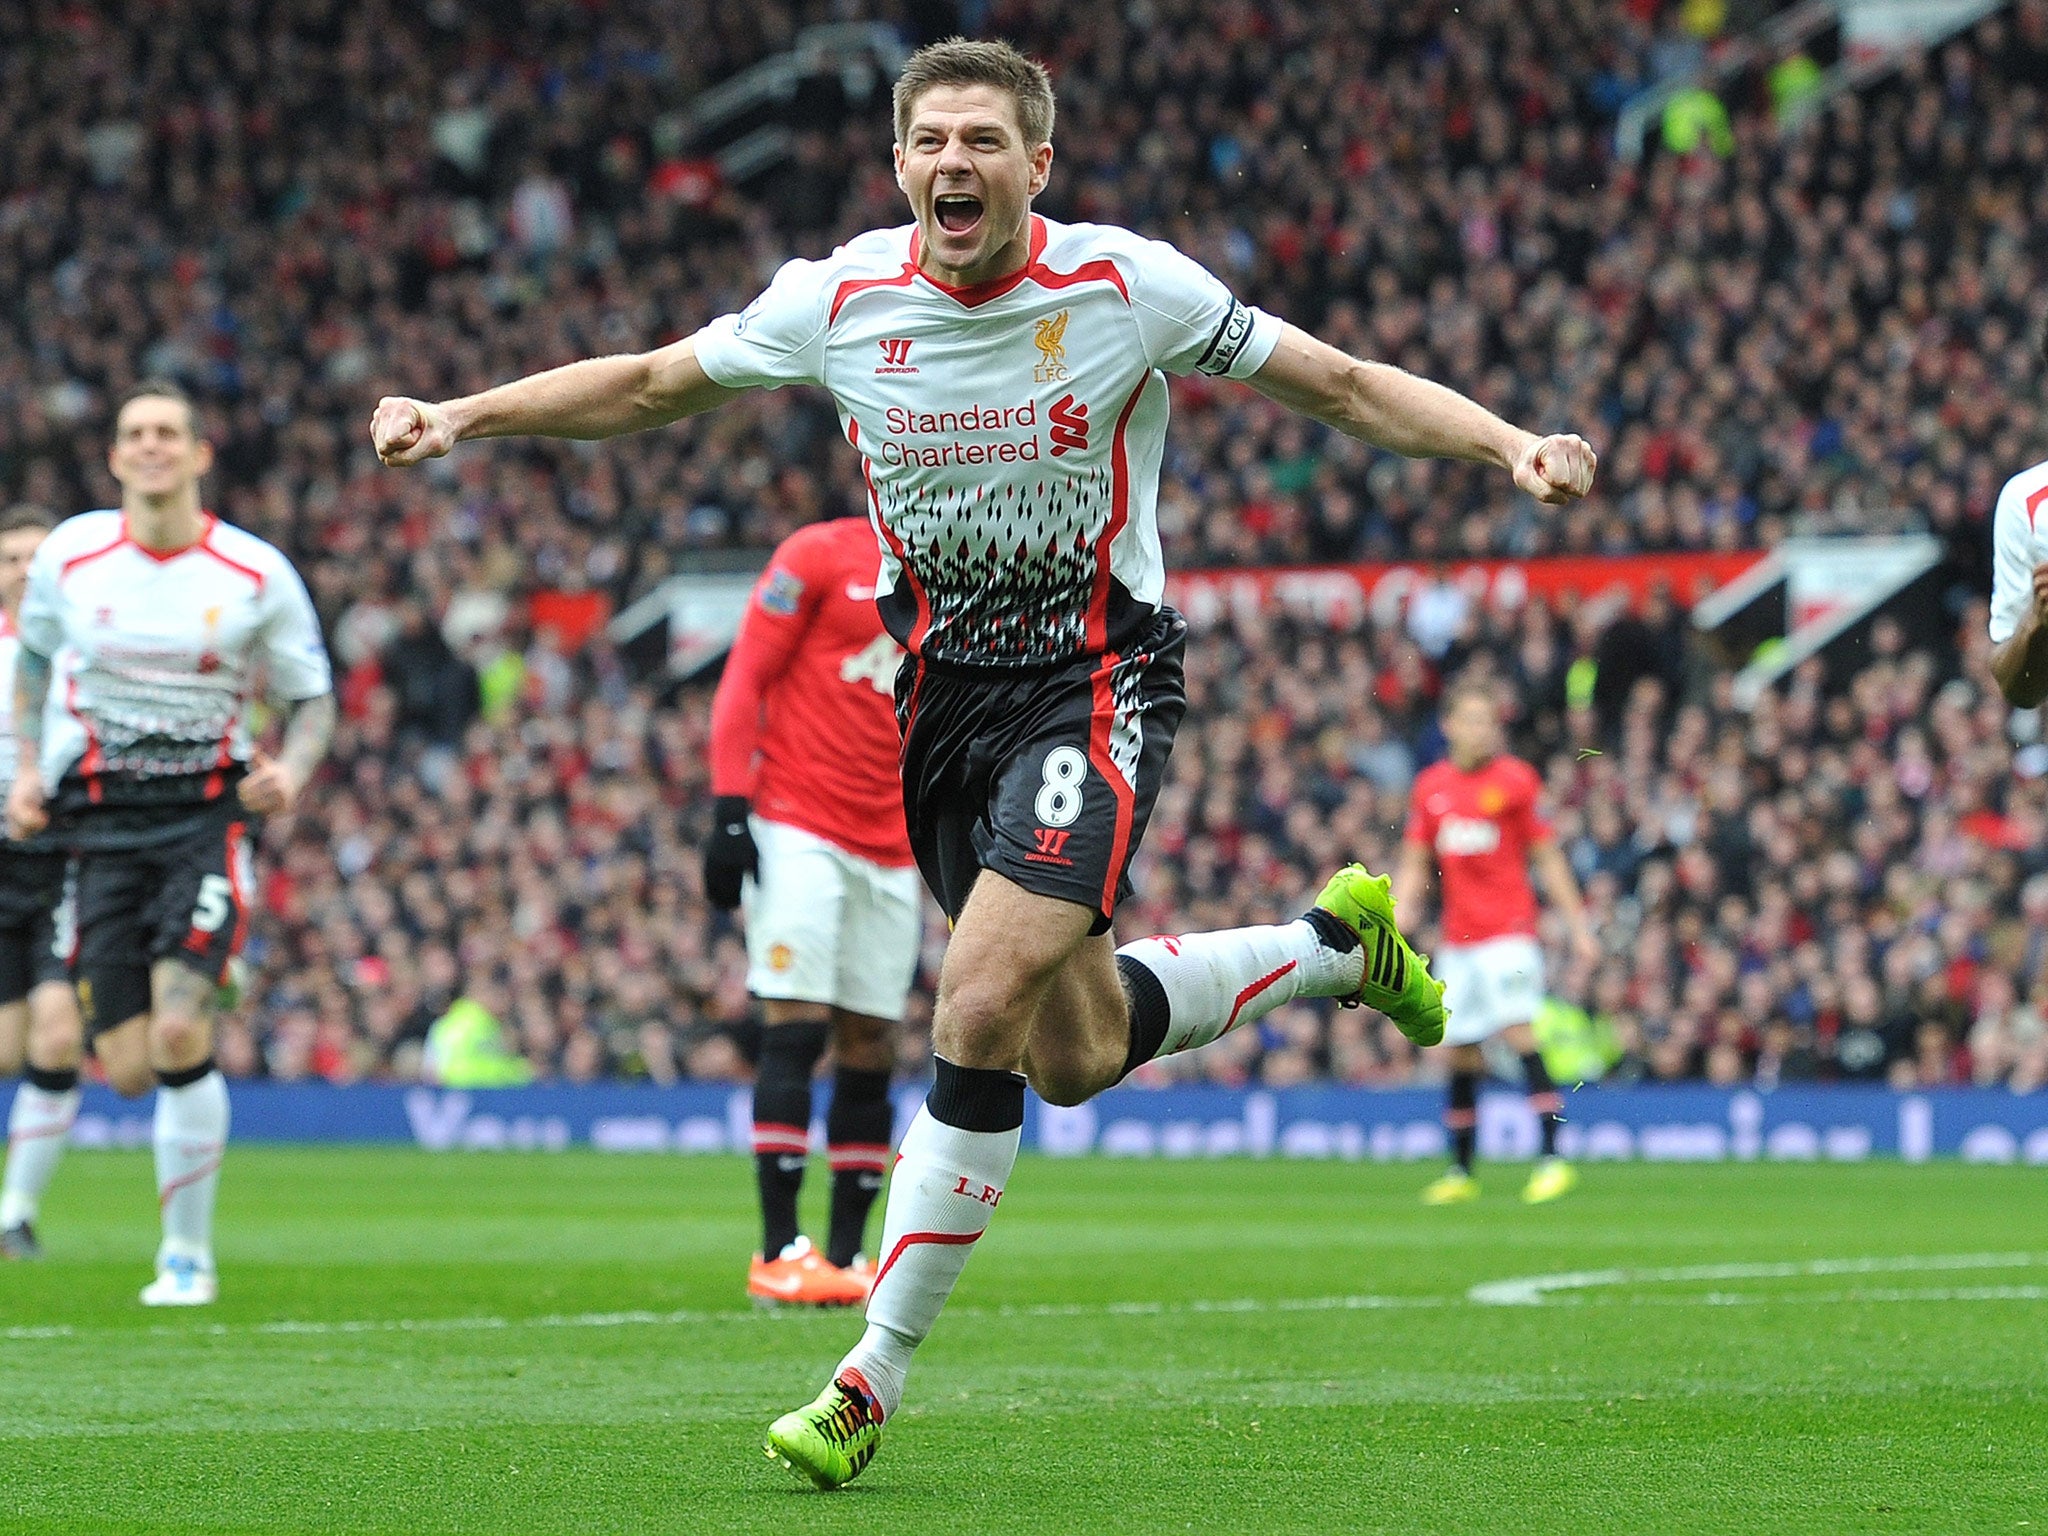 Steven Gerrard has been a huge influence at Anfield for years